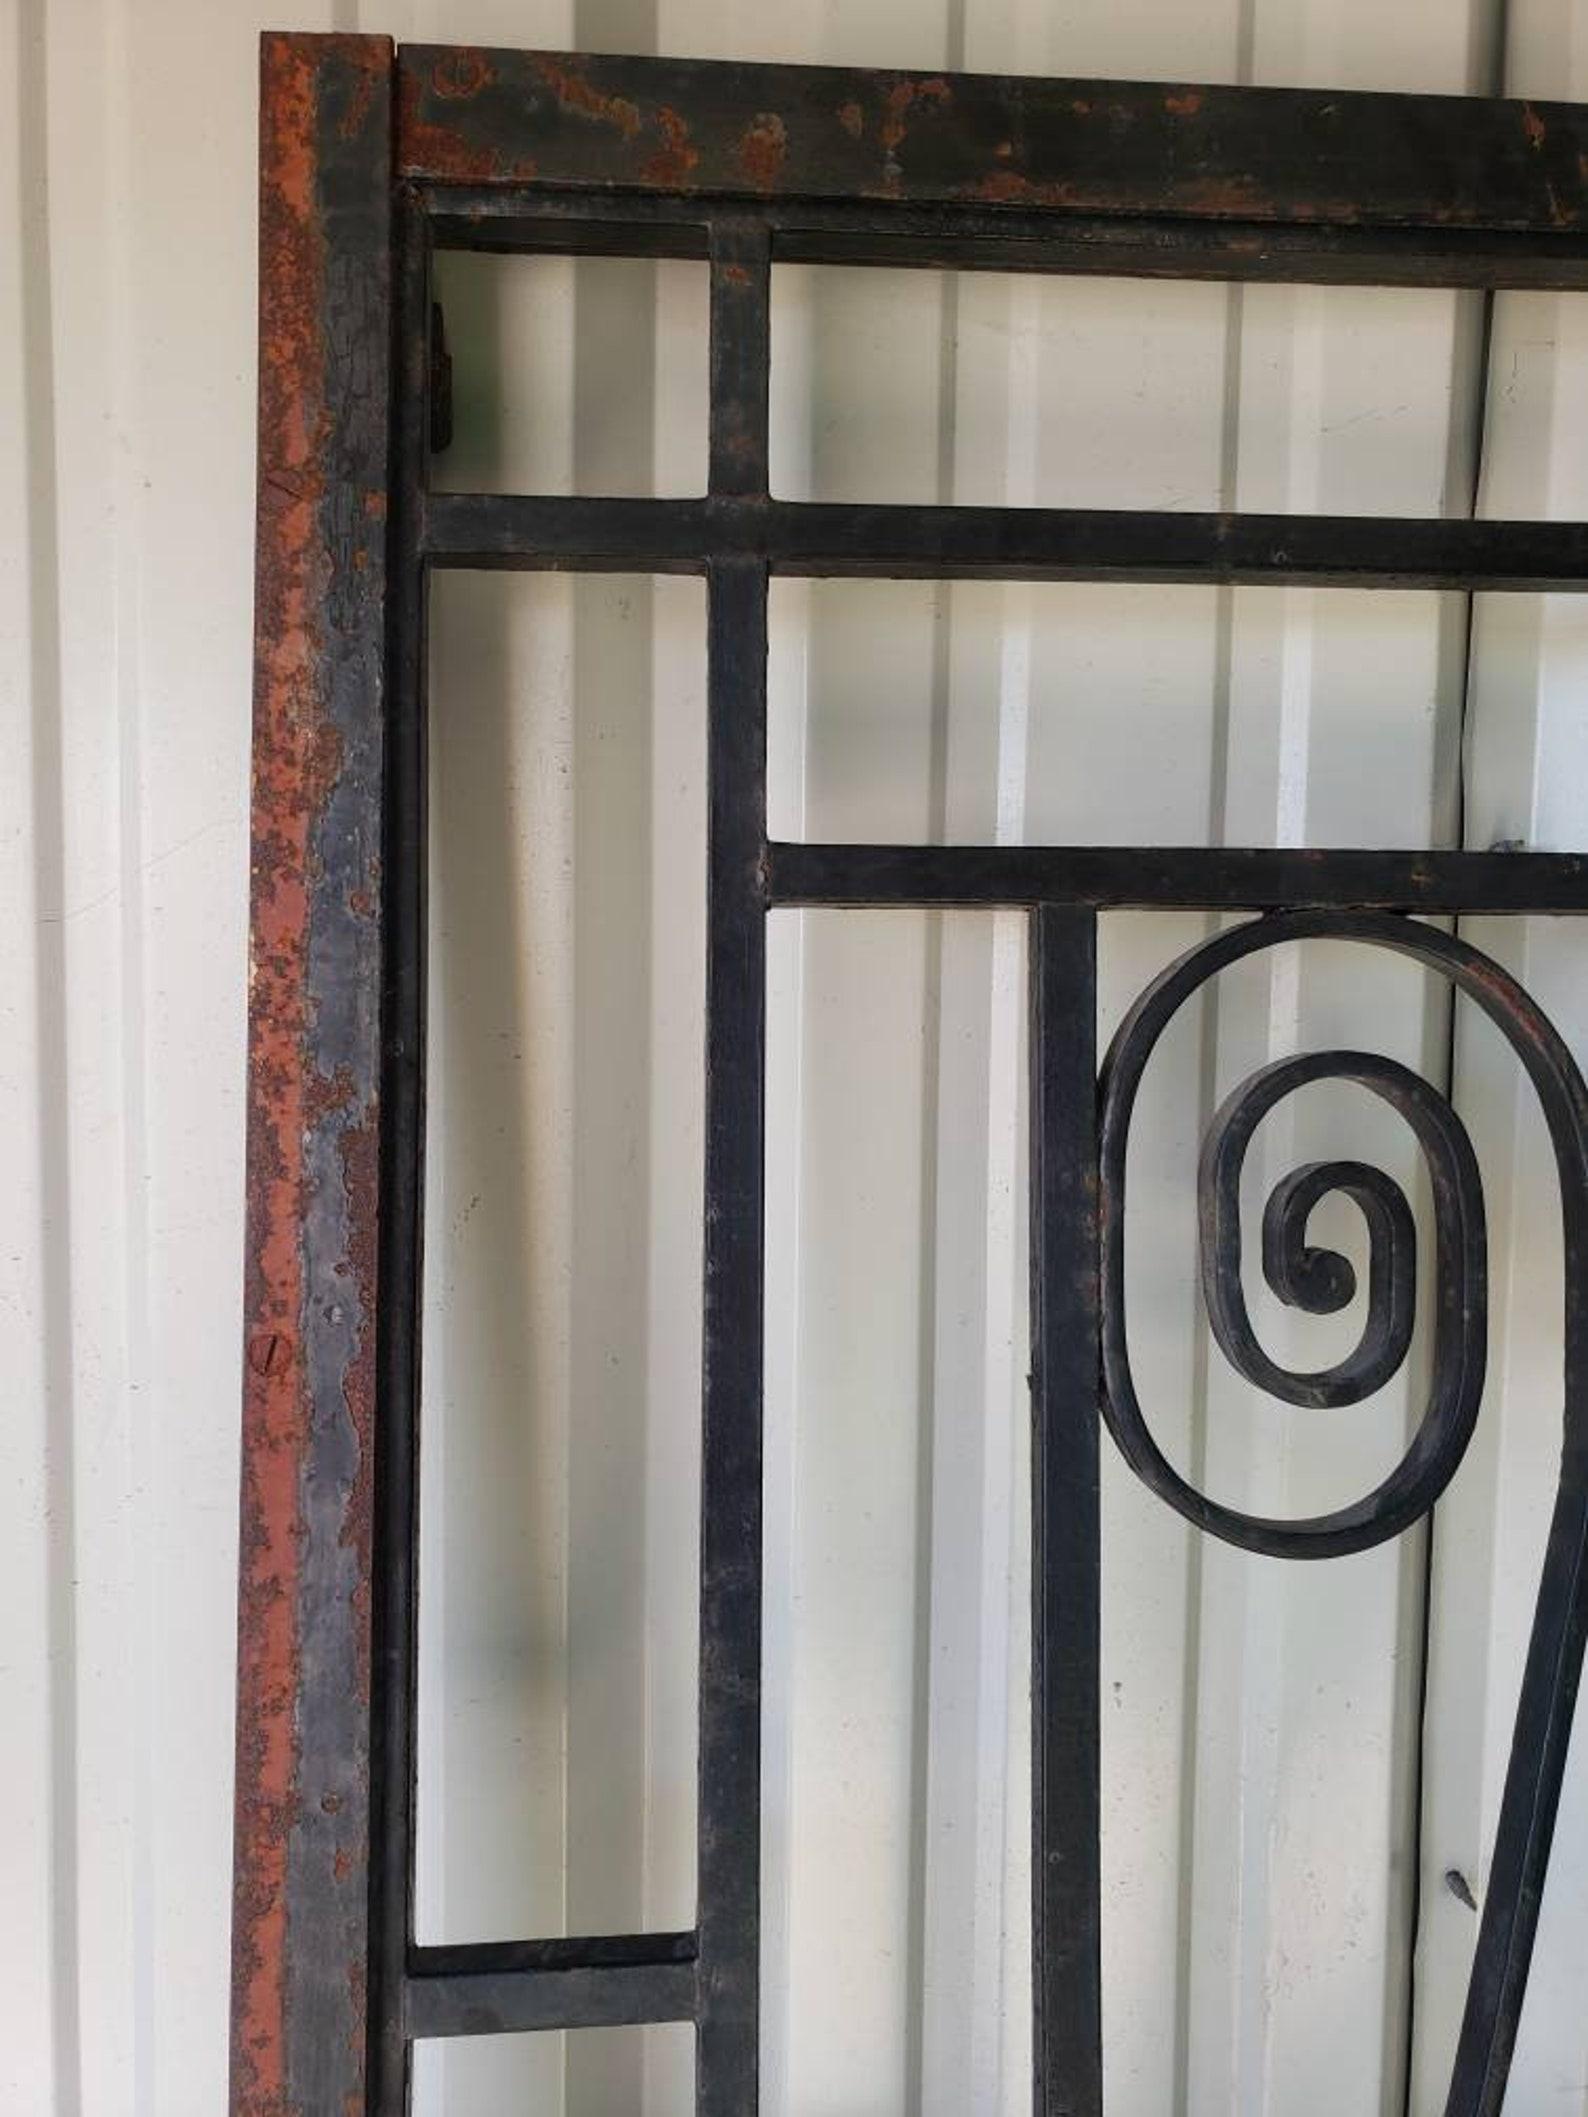 Art Deco Architectural Scrolled Forged Wrought Iron Door In Good Condition For Sale In Forney, TX